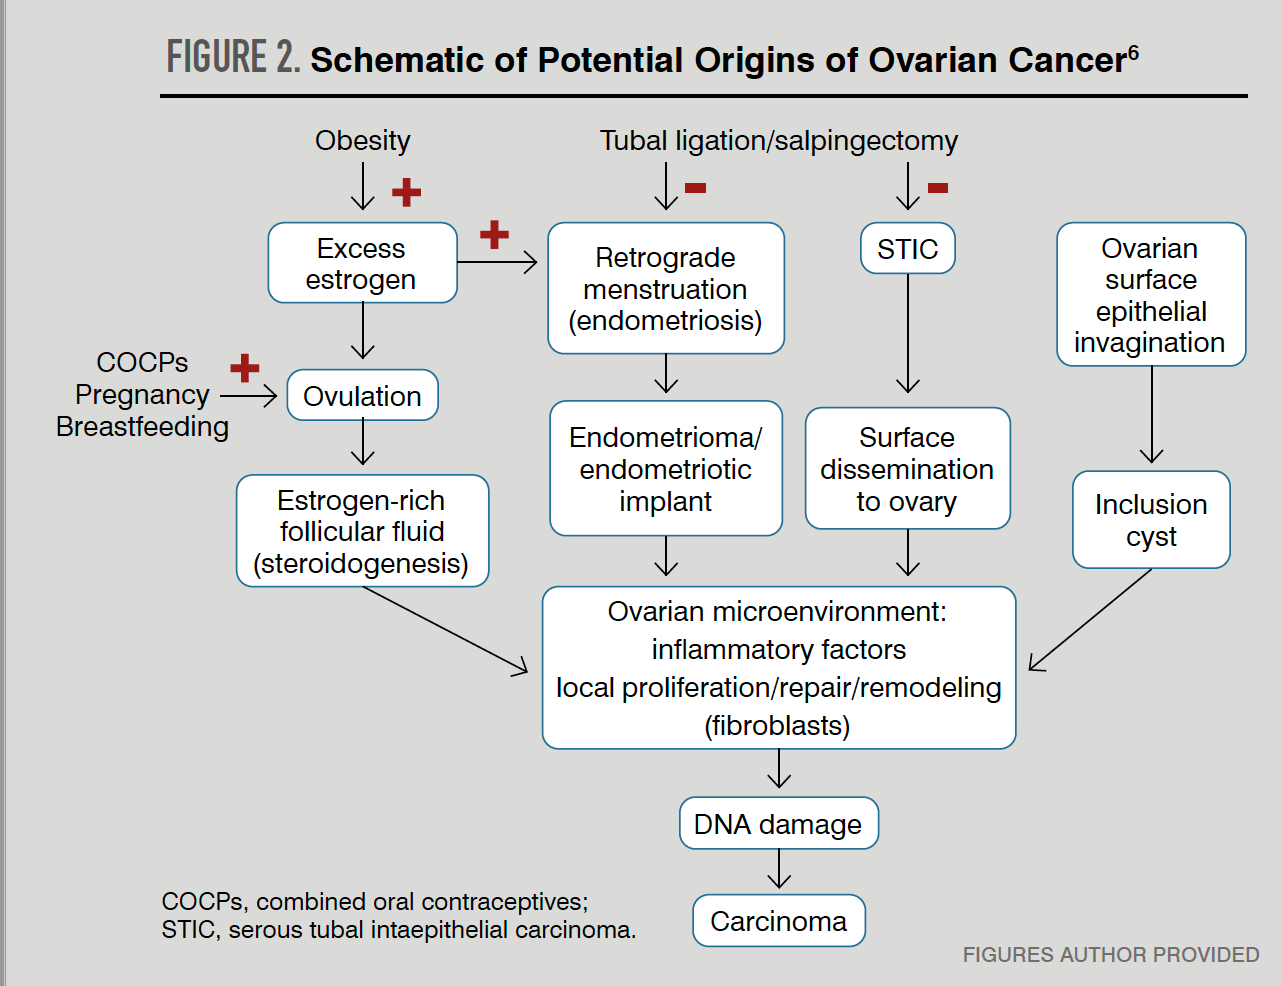 vice versa Barcelona Way Clues to the origins of ovarian cancer